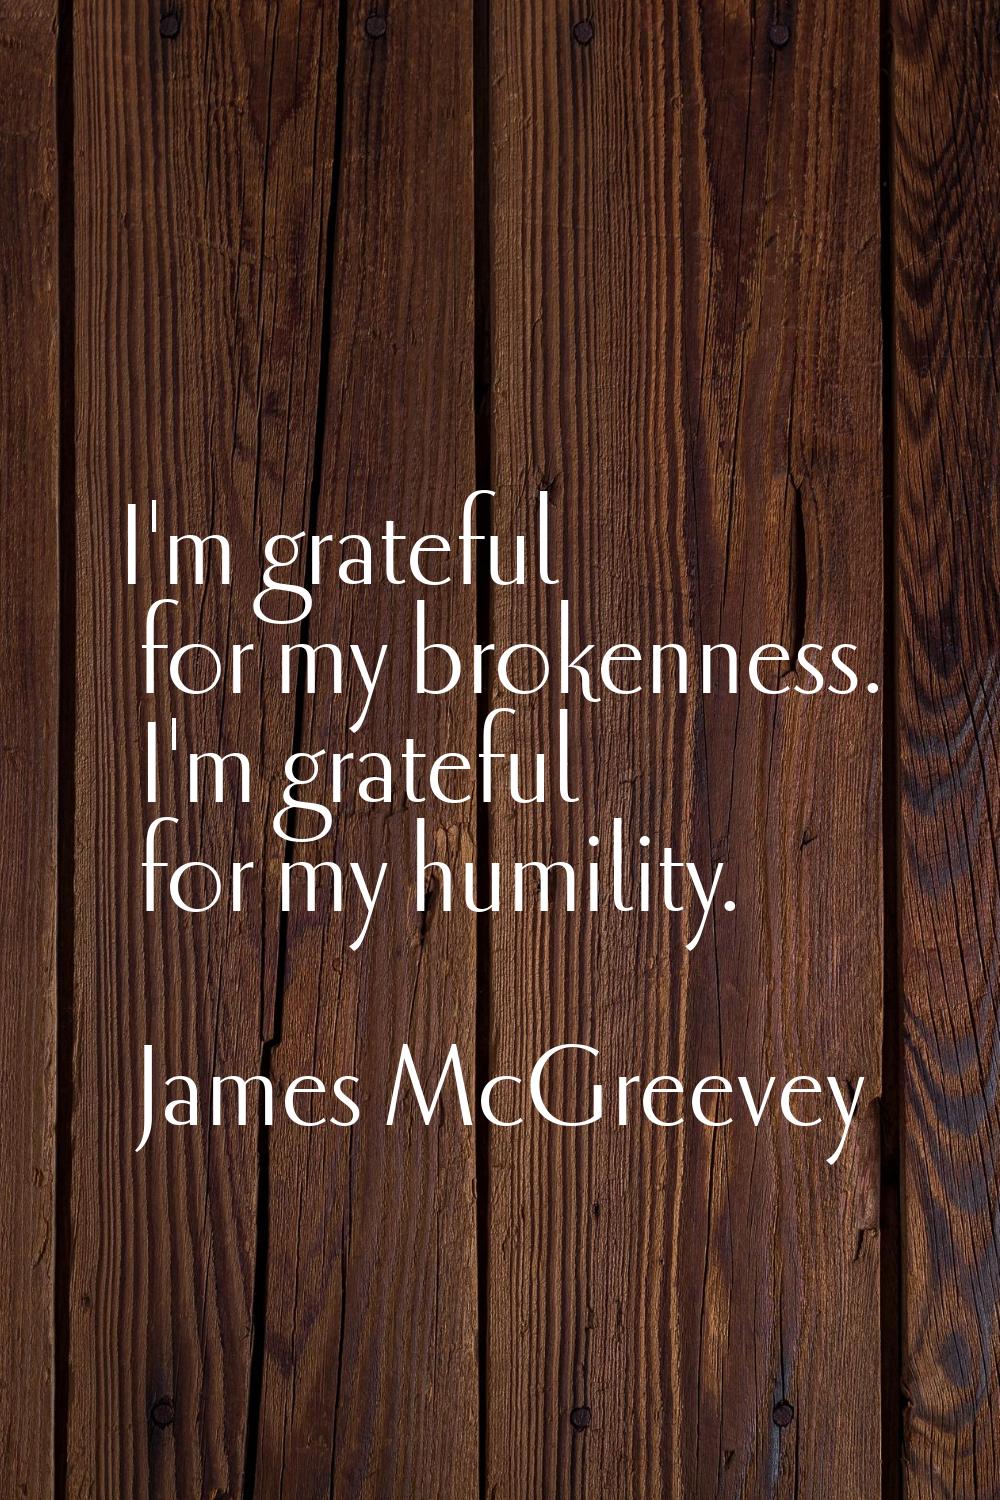 I'm grateful for my brokenness. I'm grateful for my humility.